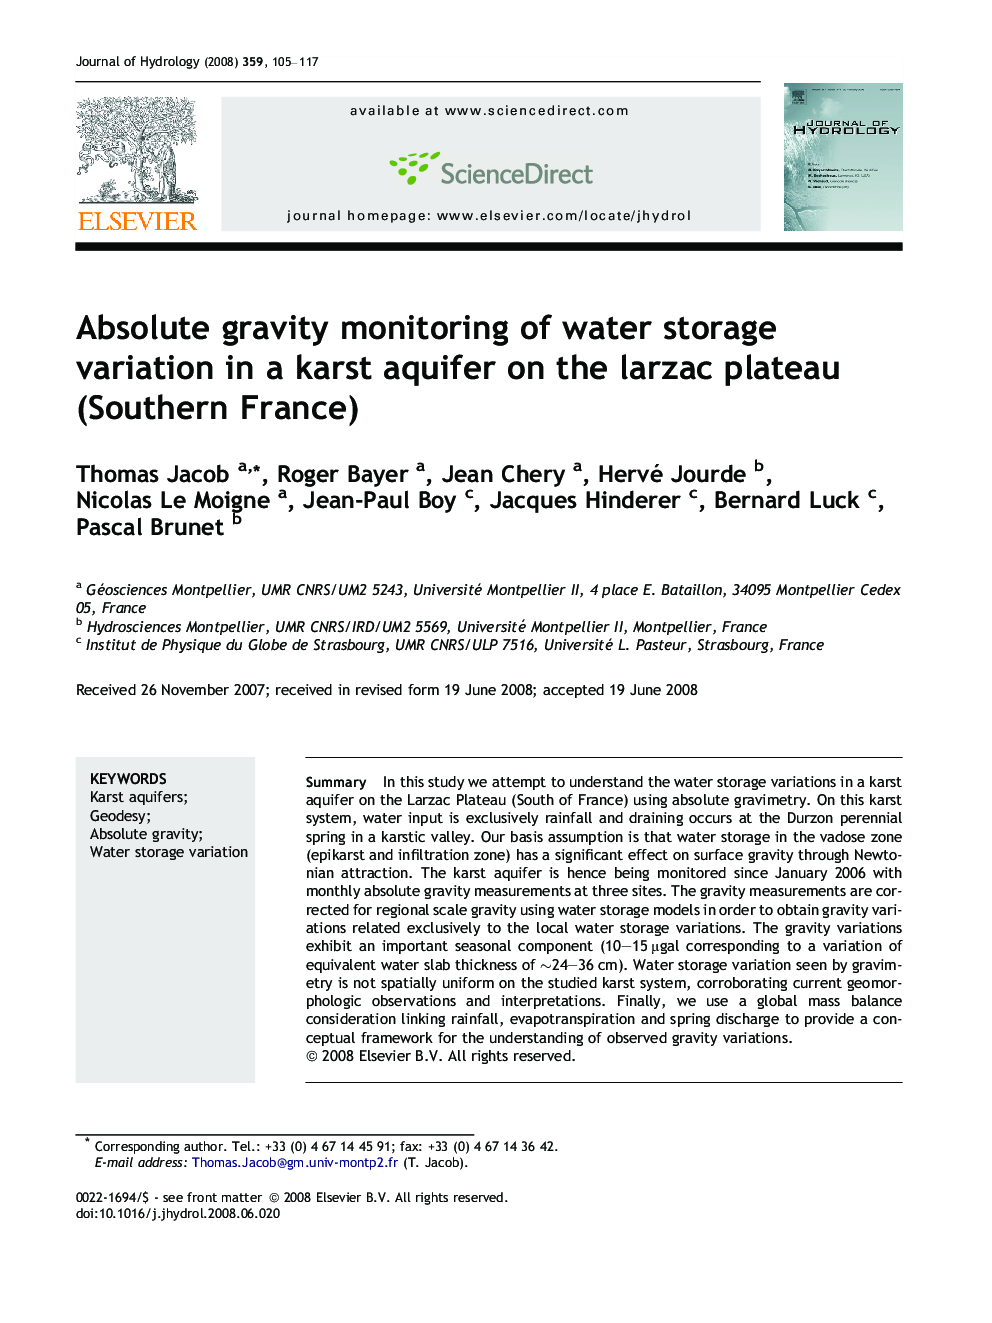 Absolute gravity monitoring of water storage variation in a karst aquifer on the larzac plateau (Southern France)